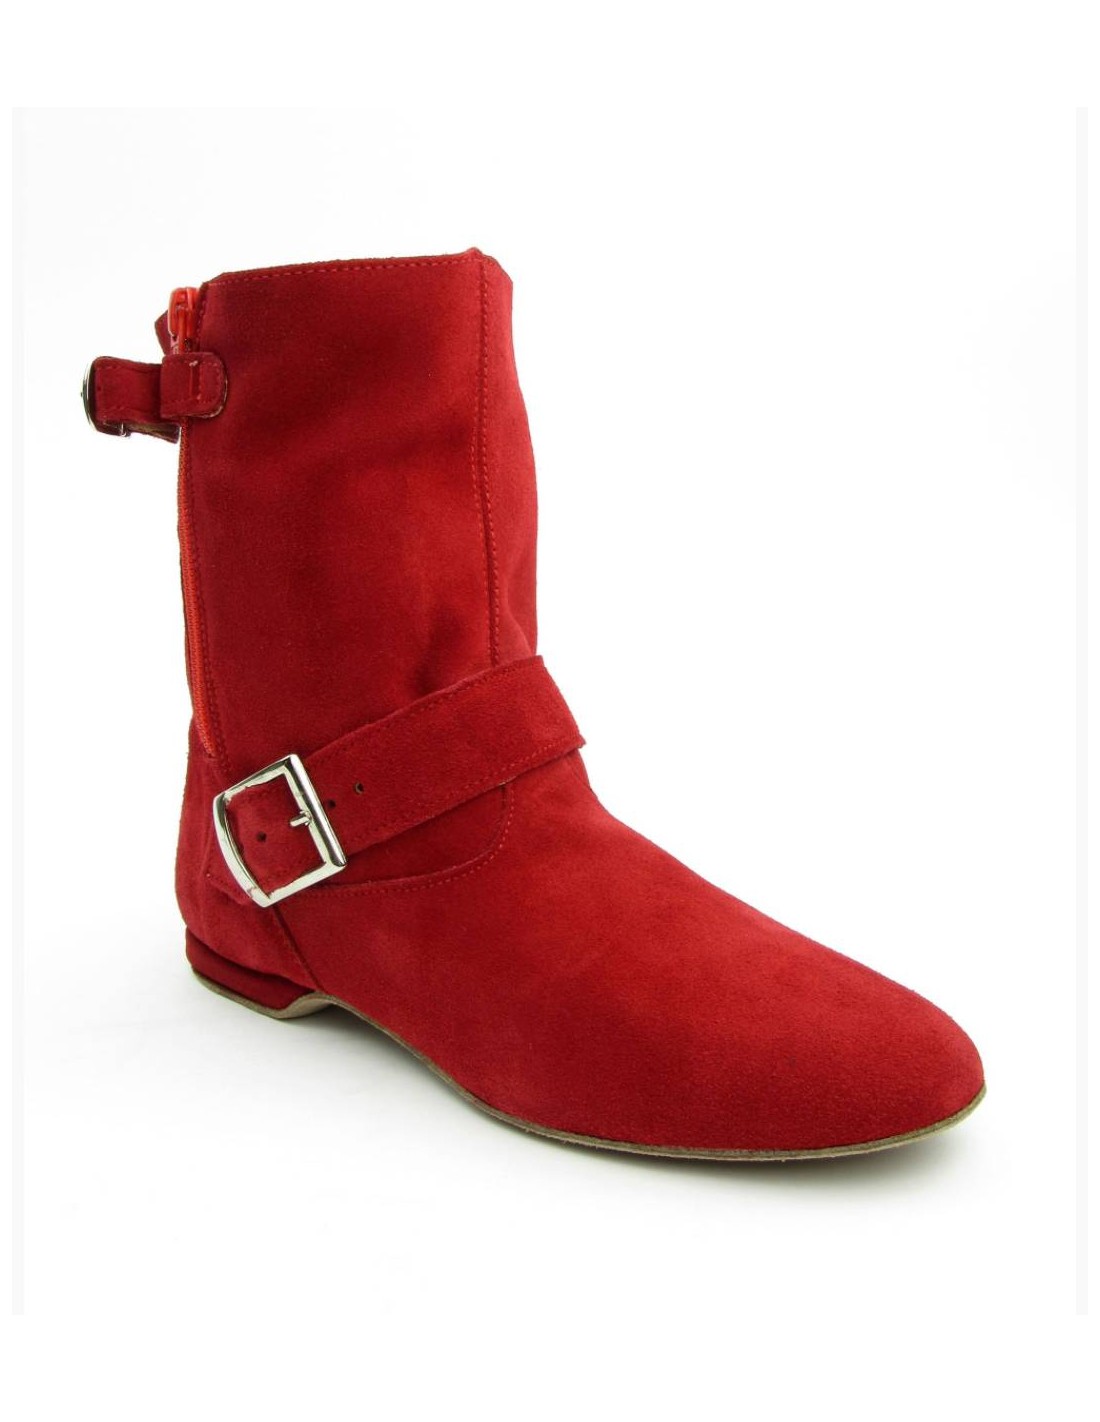 West Coast Swing Ankle Boot in red 